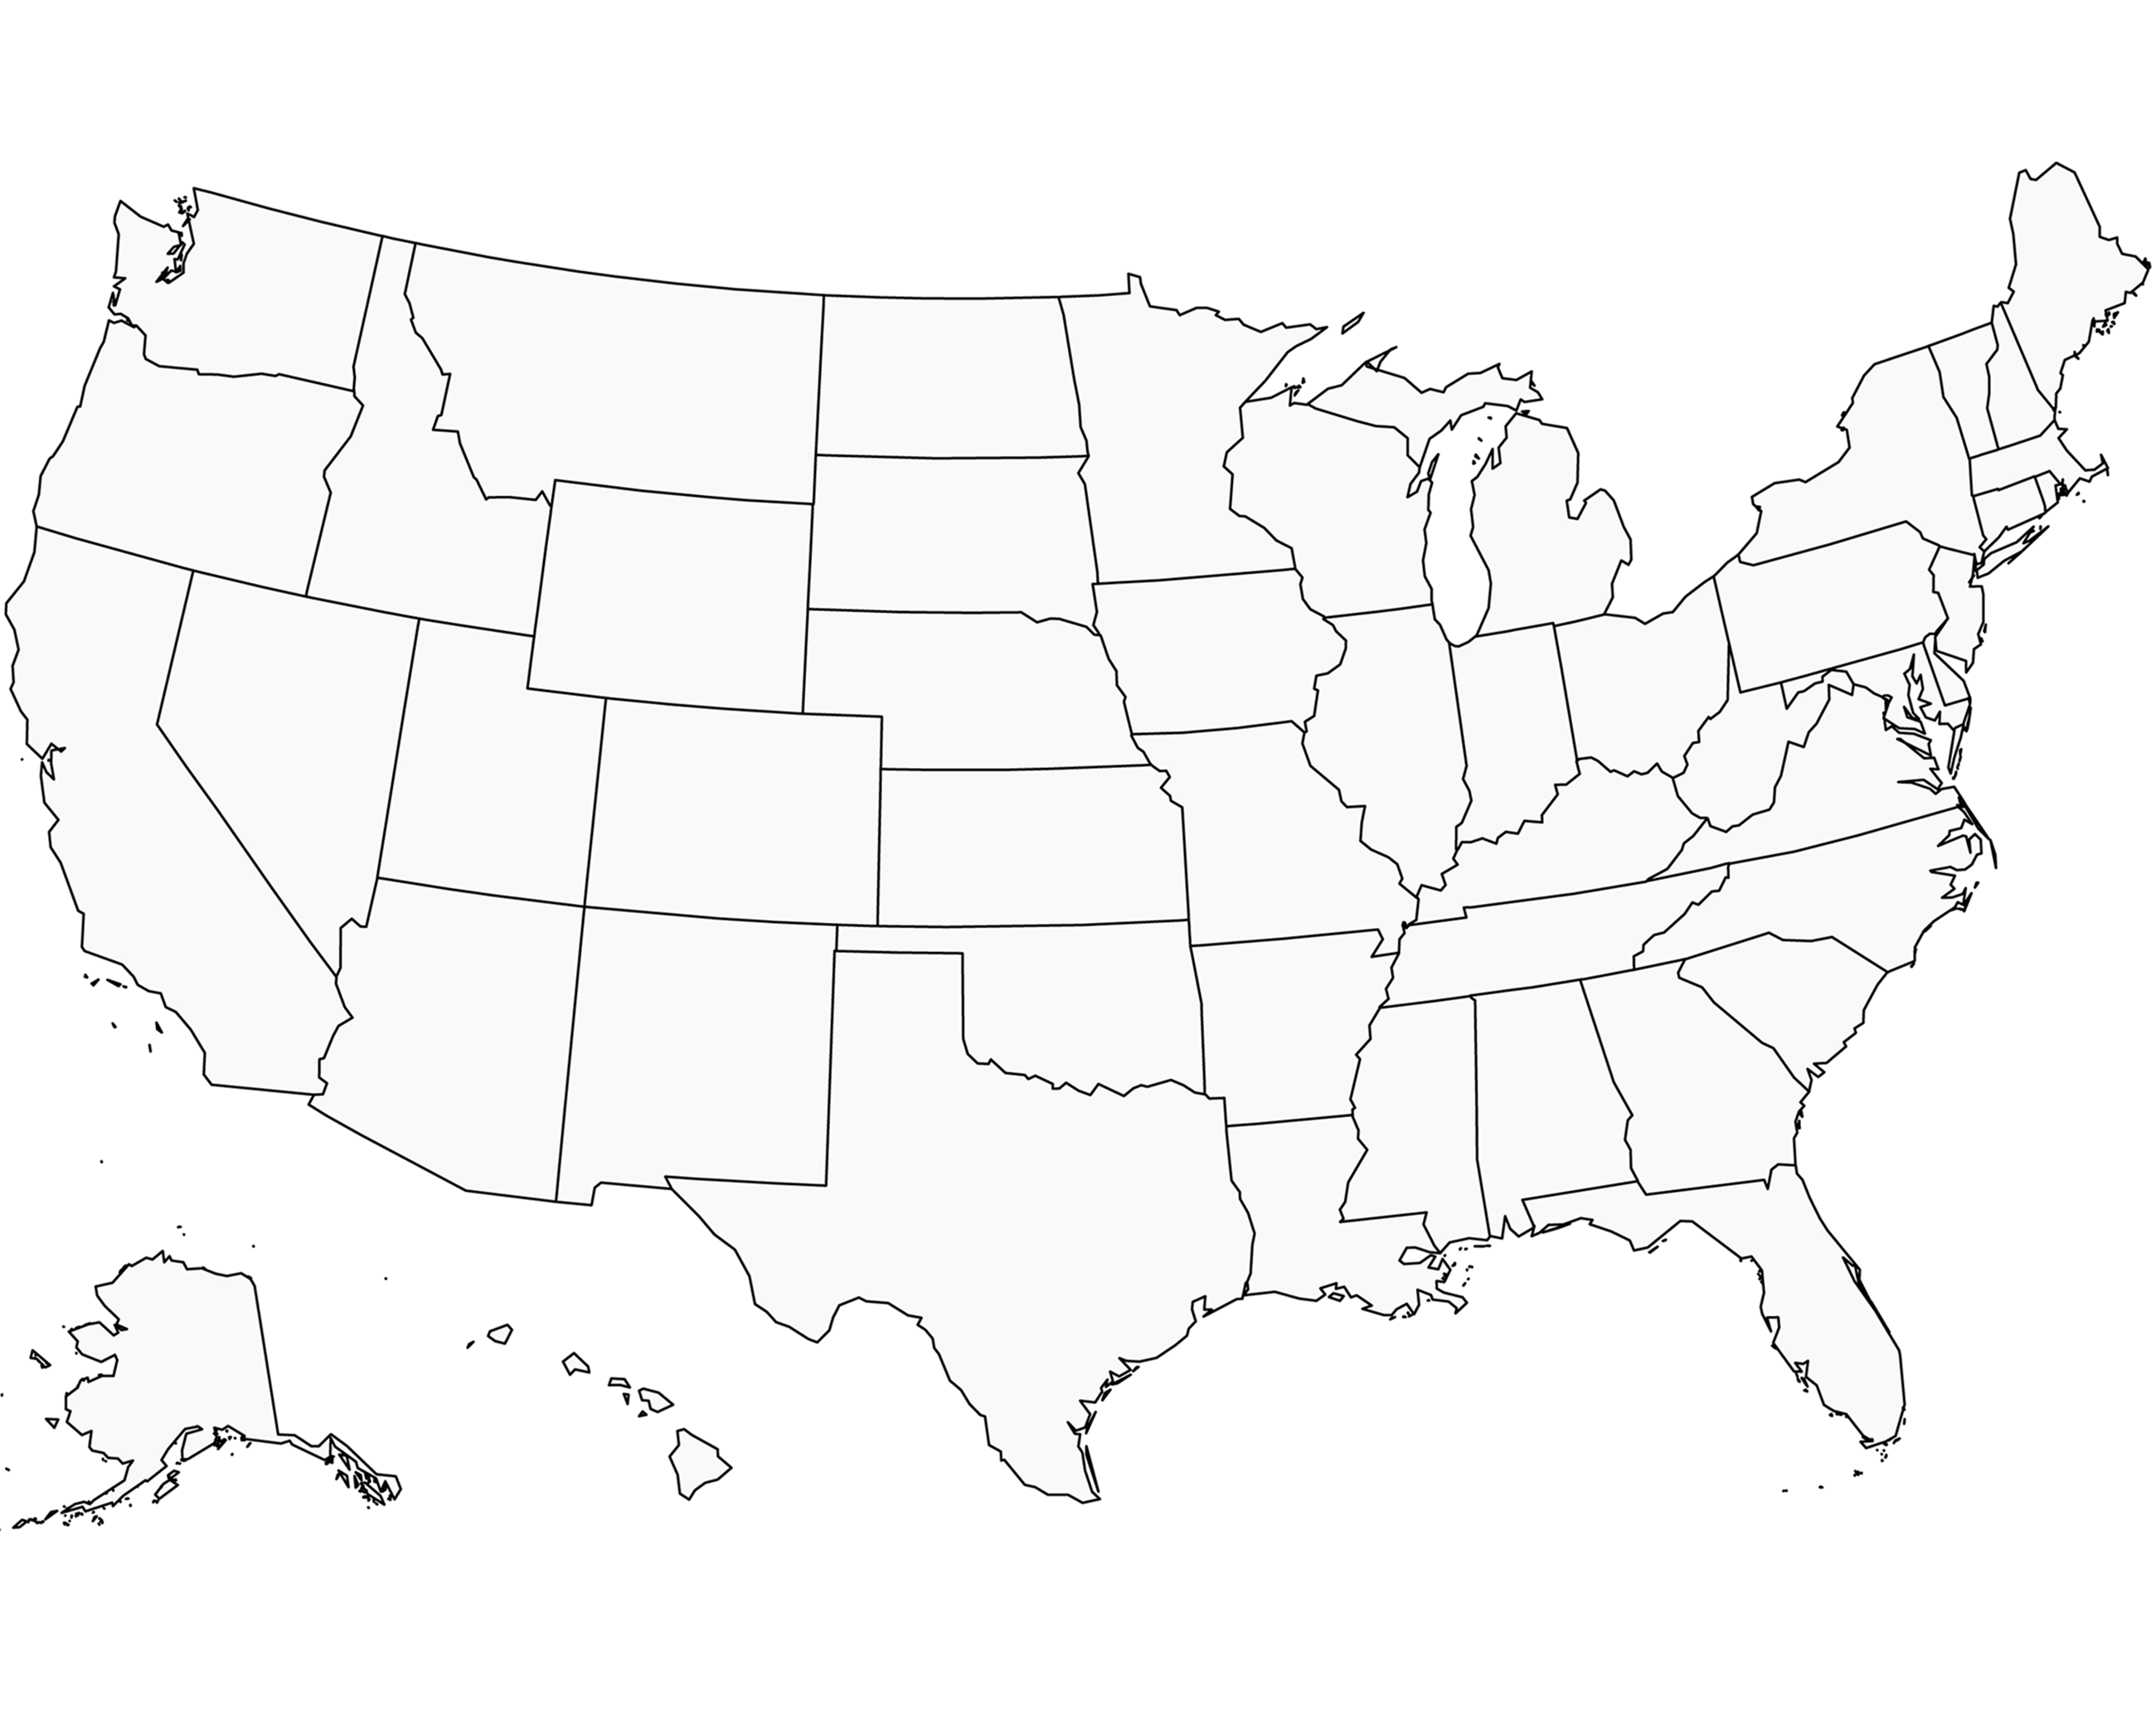 USA Map with LOTUS data site locations